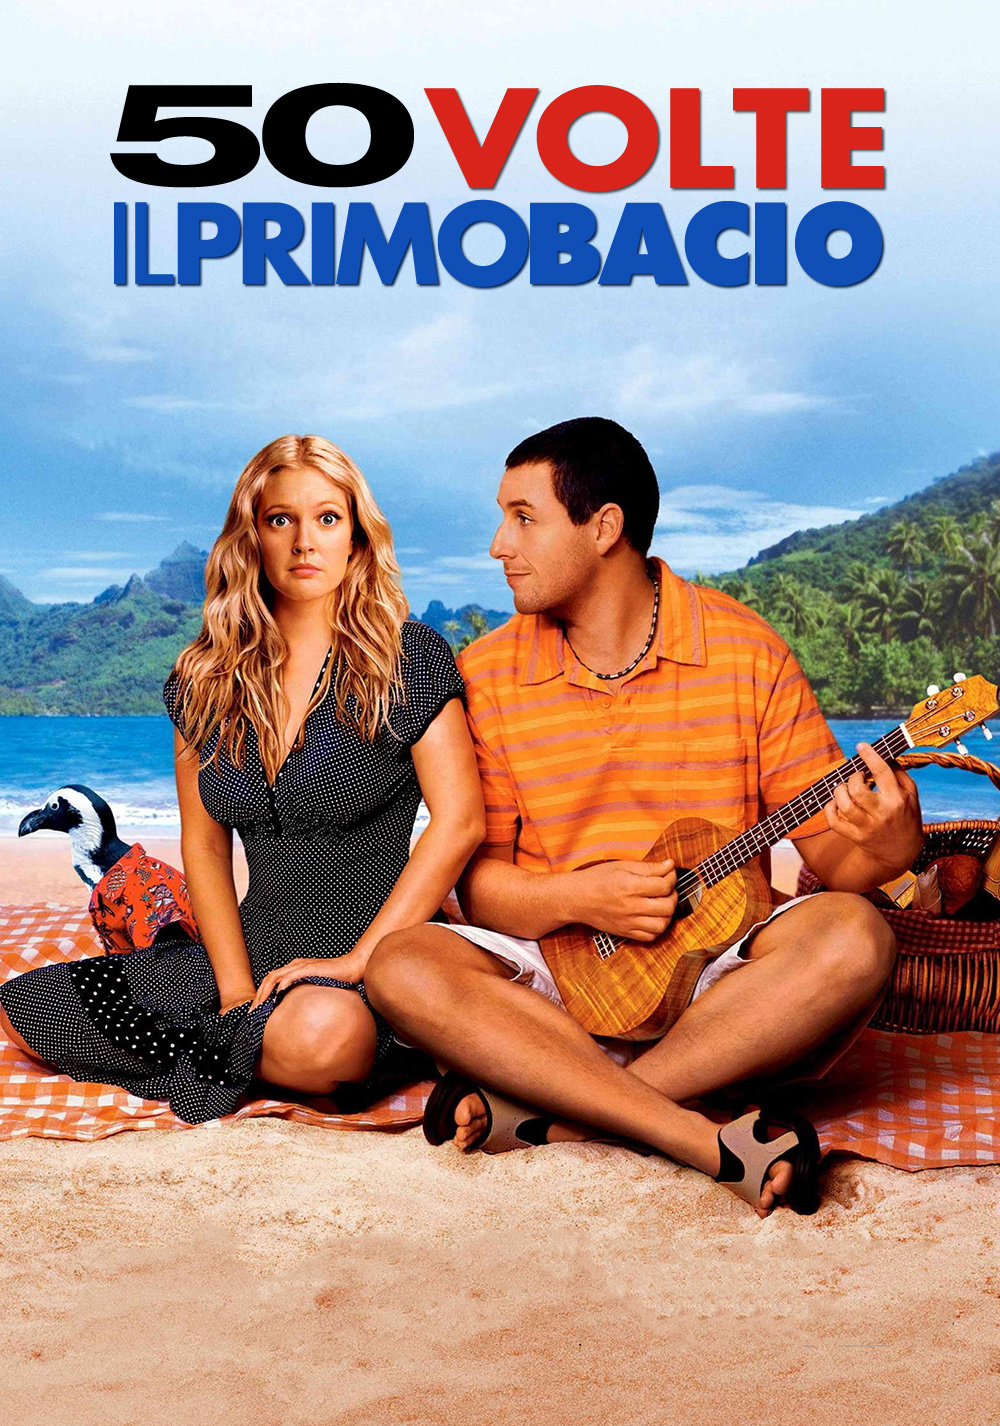 View, Download, Rate, and Comment on this 50 First Dates Movie Poster. 